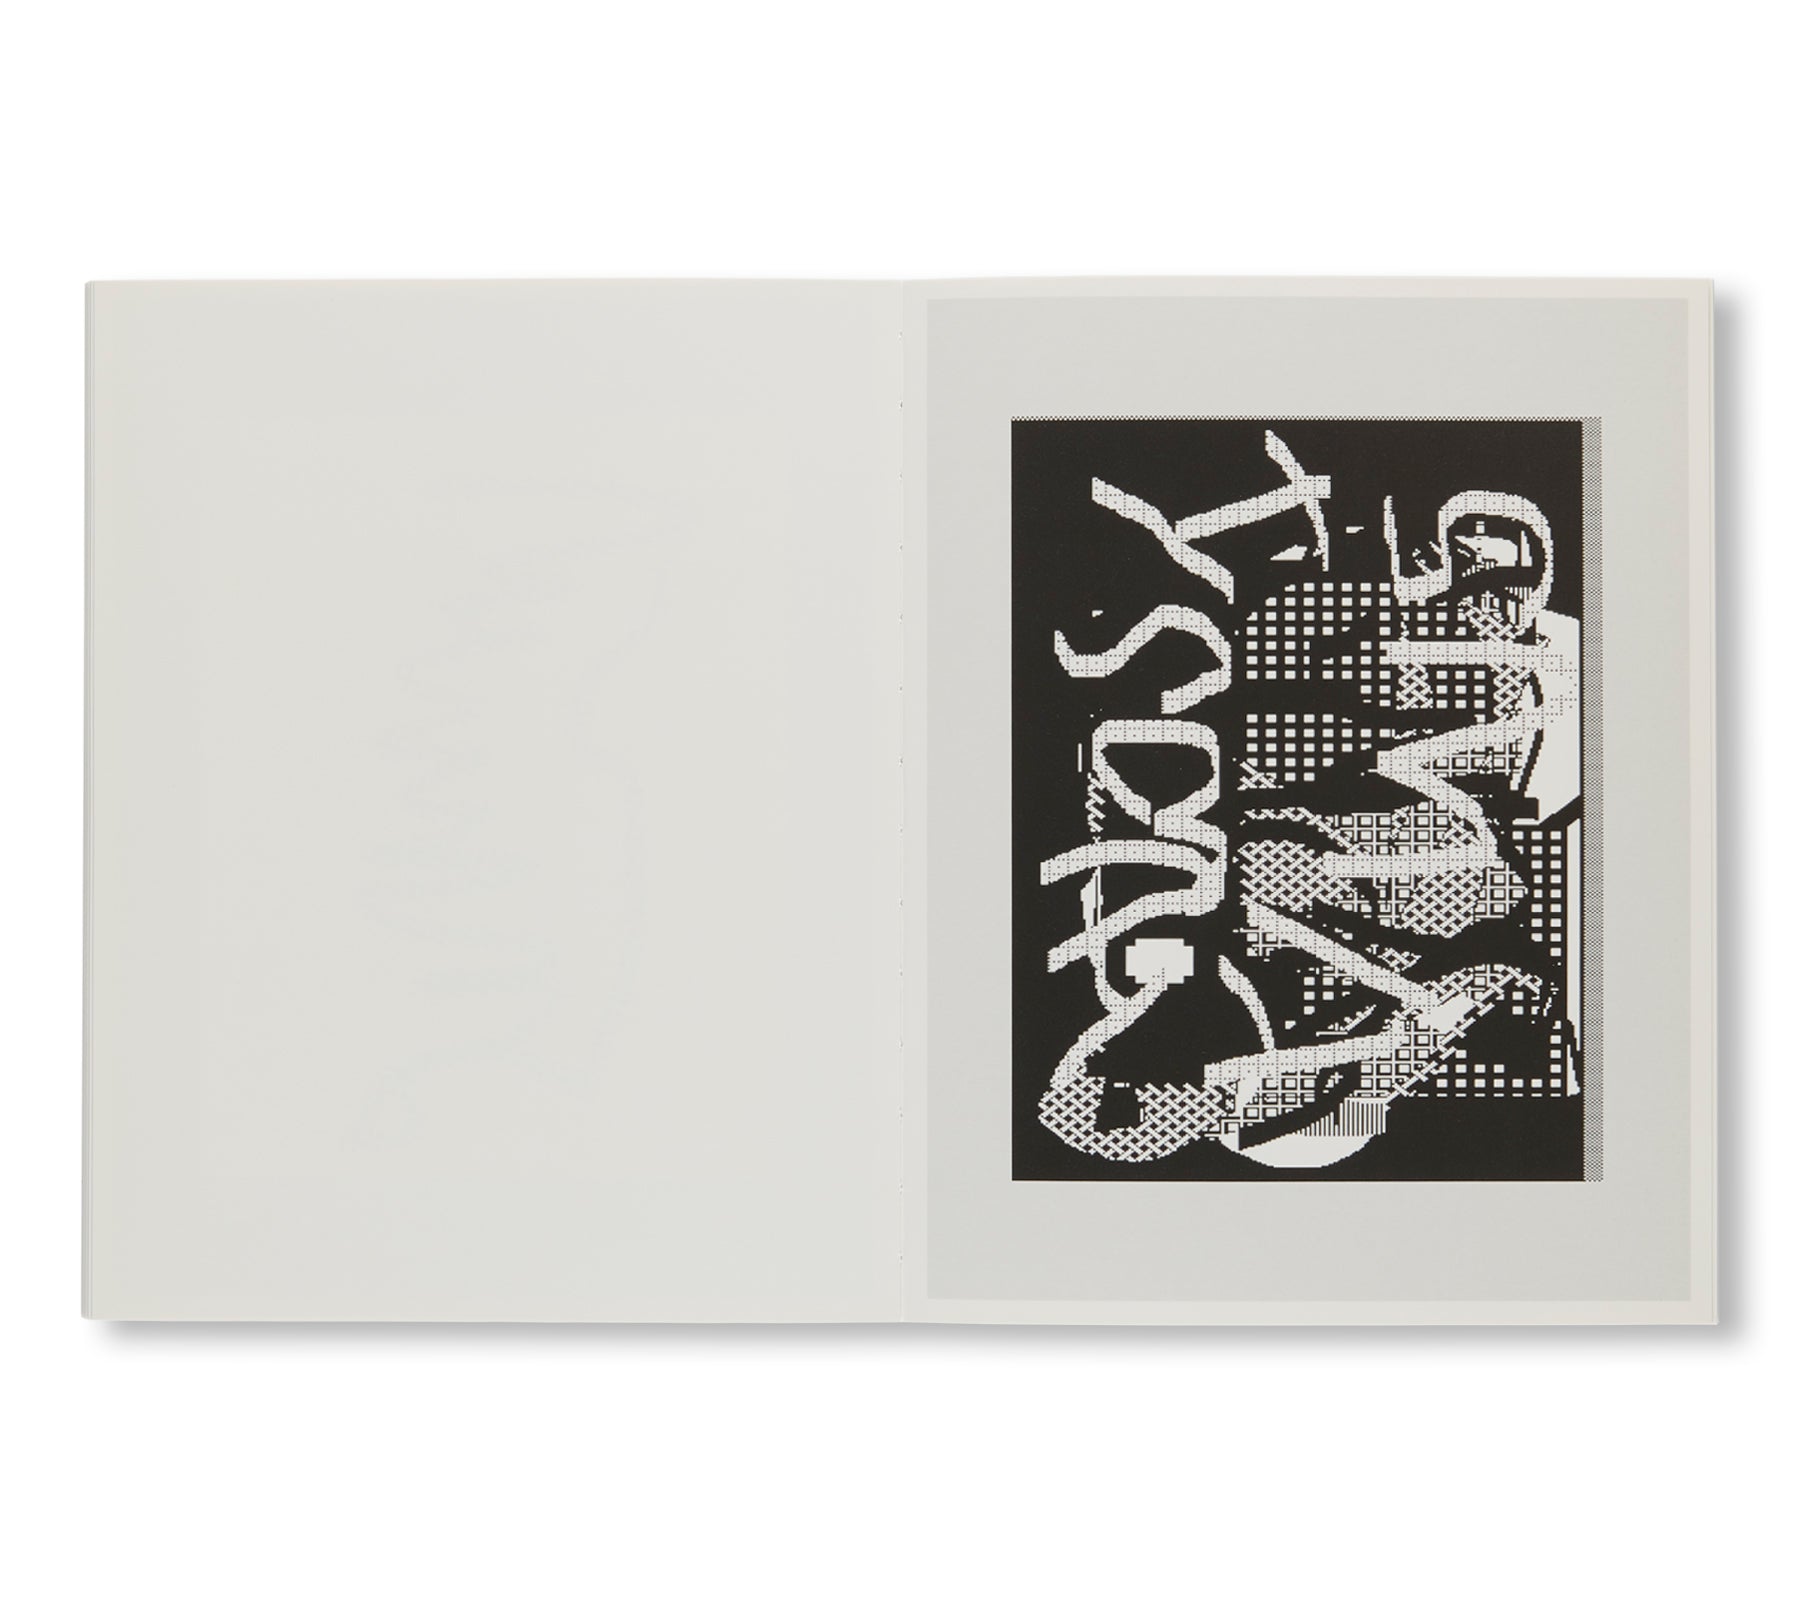 CAN YOUR MONKEY DO THE DOG by Josh Smith, Christopher Wool